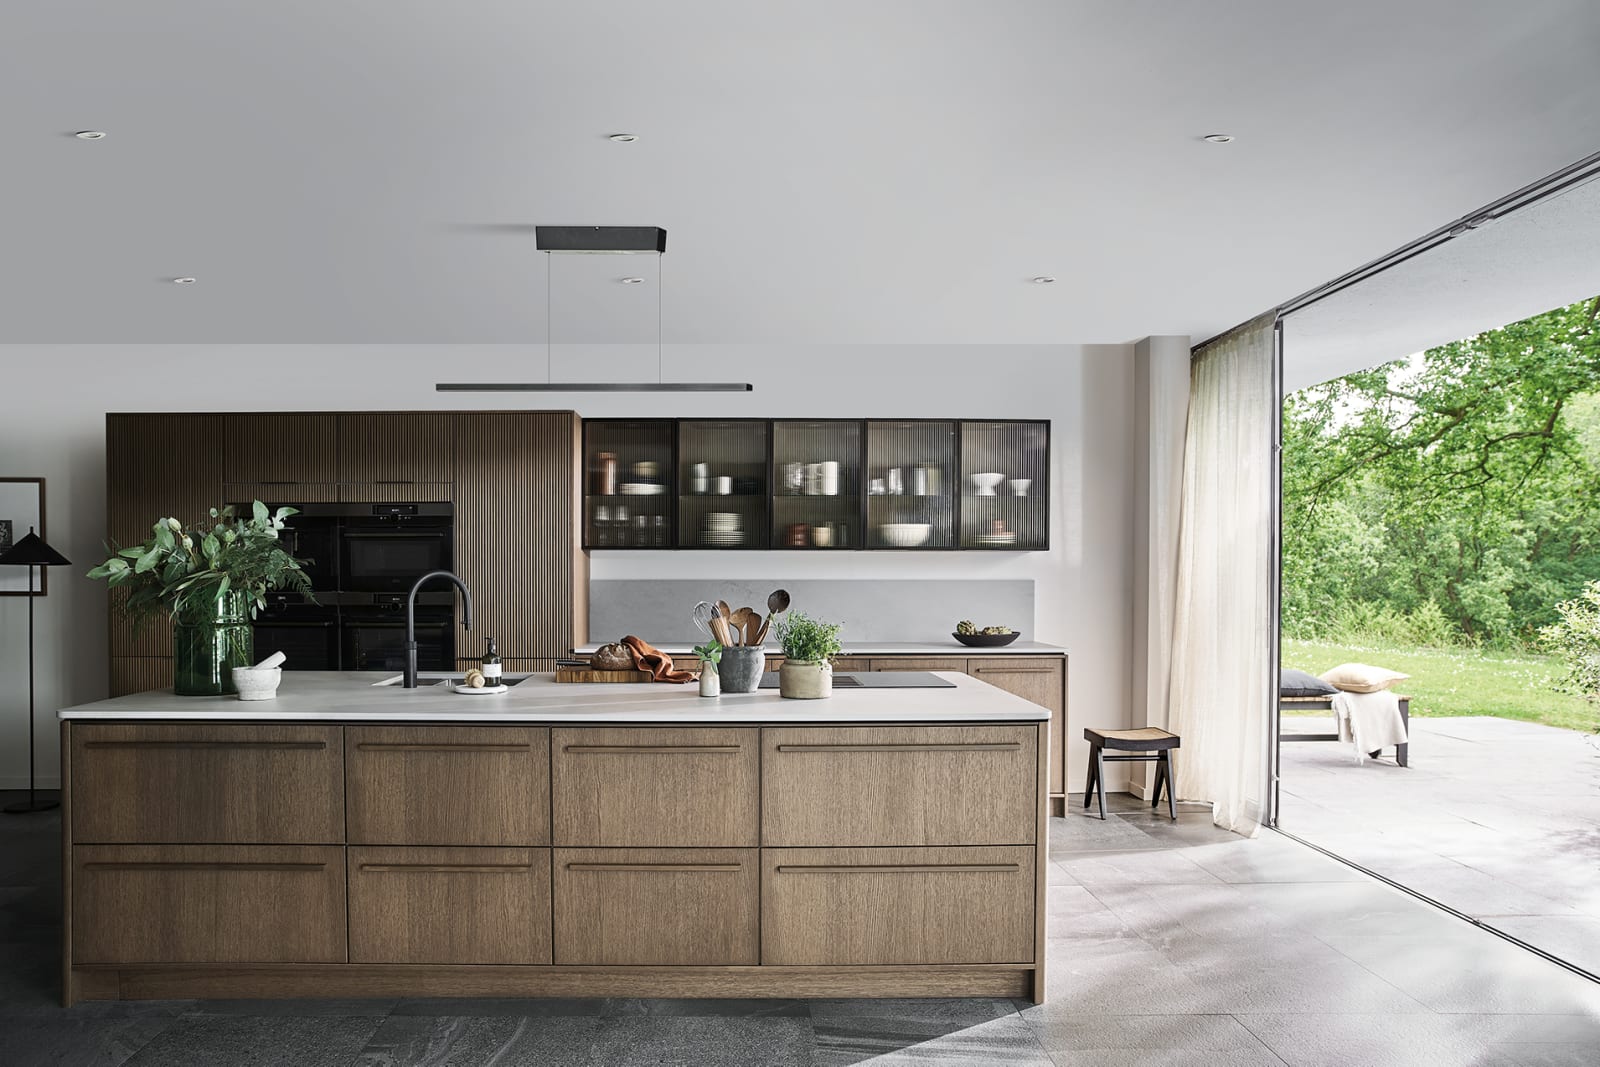 Magnet Kitchens 2021 Nordic Nature range with Fluted oak cabinets with Dekton Aeri worktop. Floating island with boiling hot water tap.